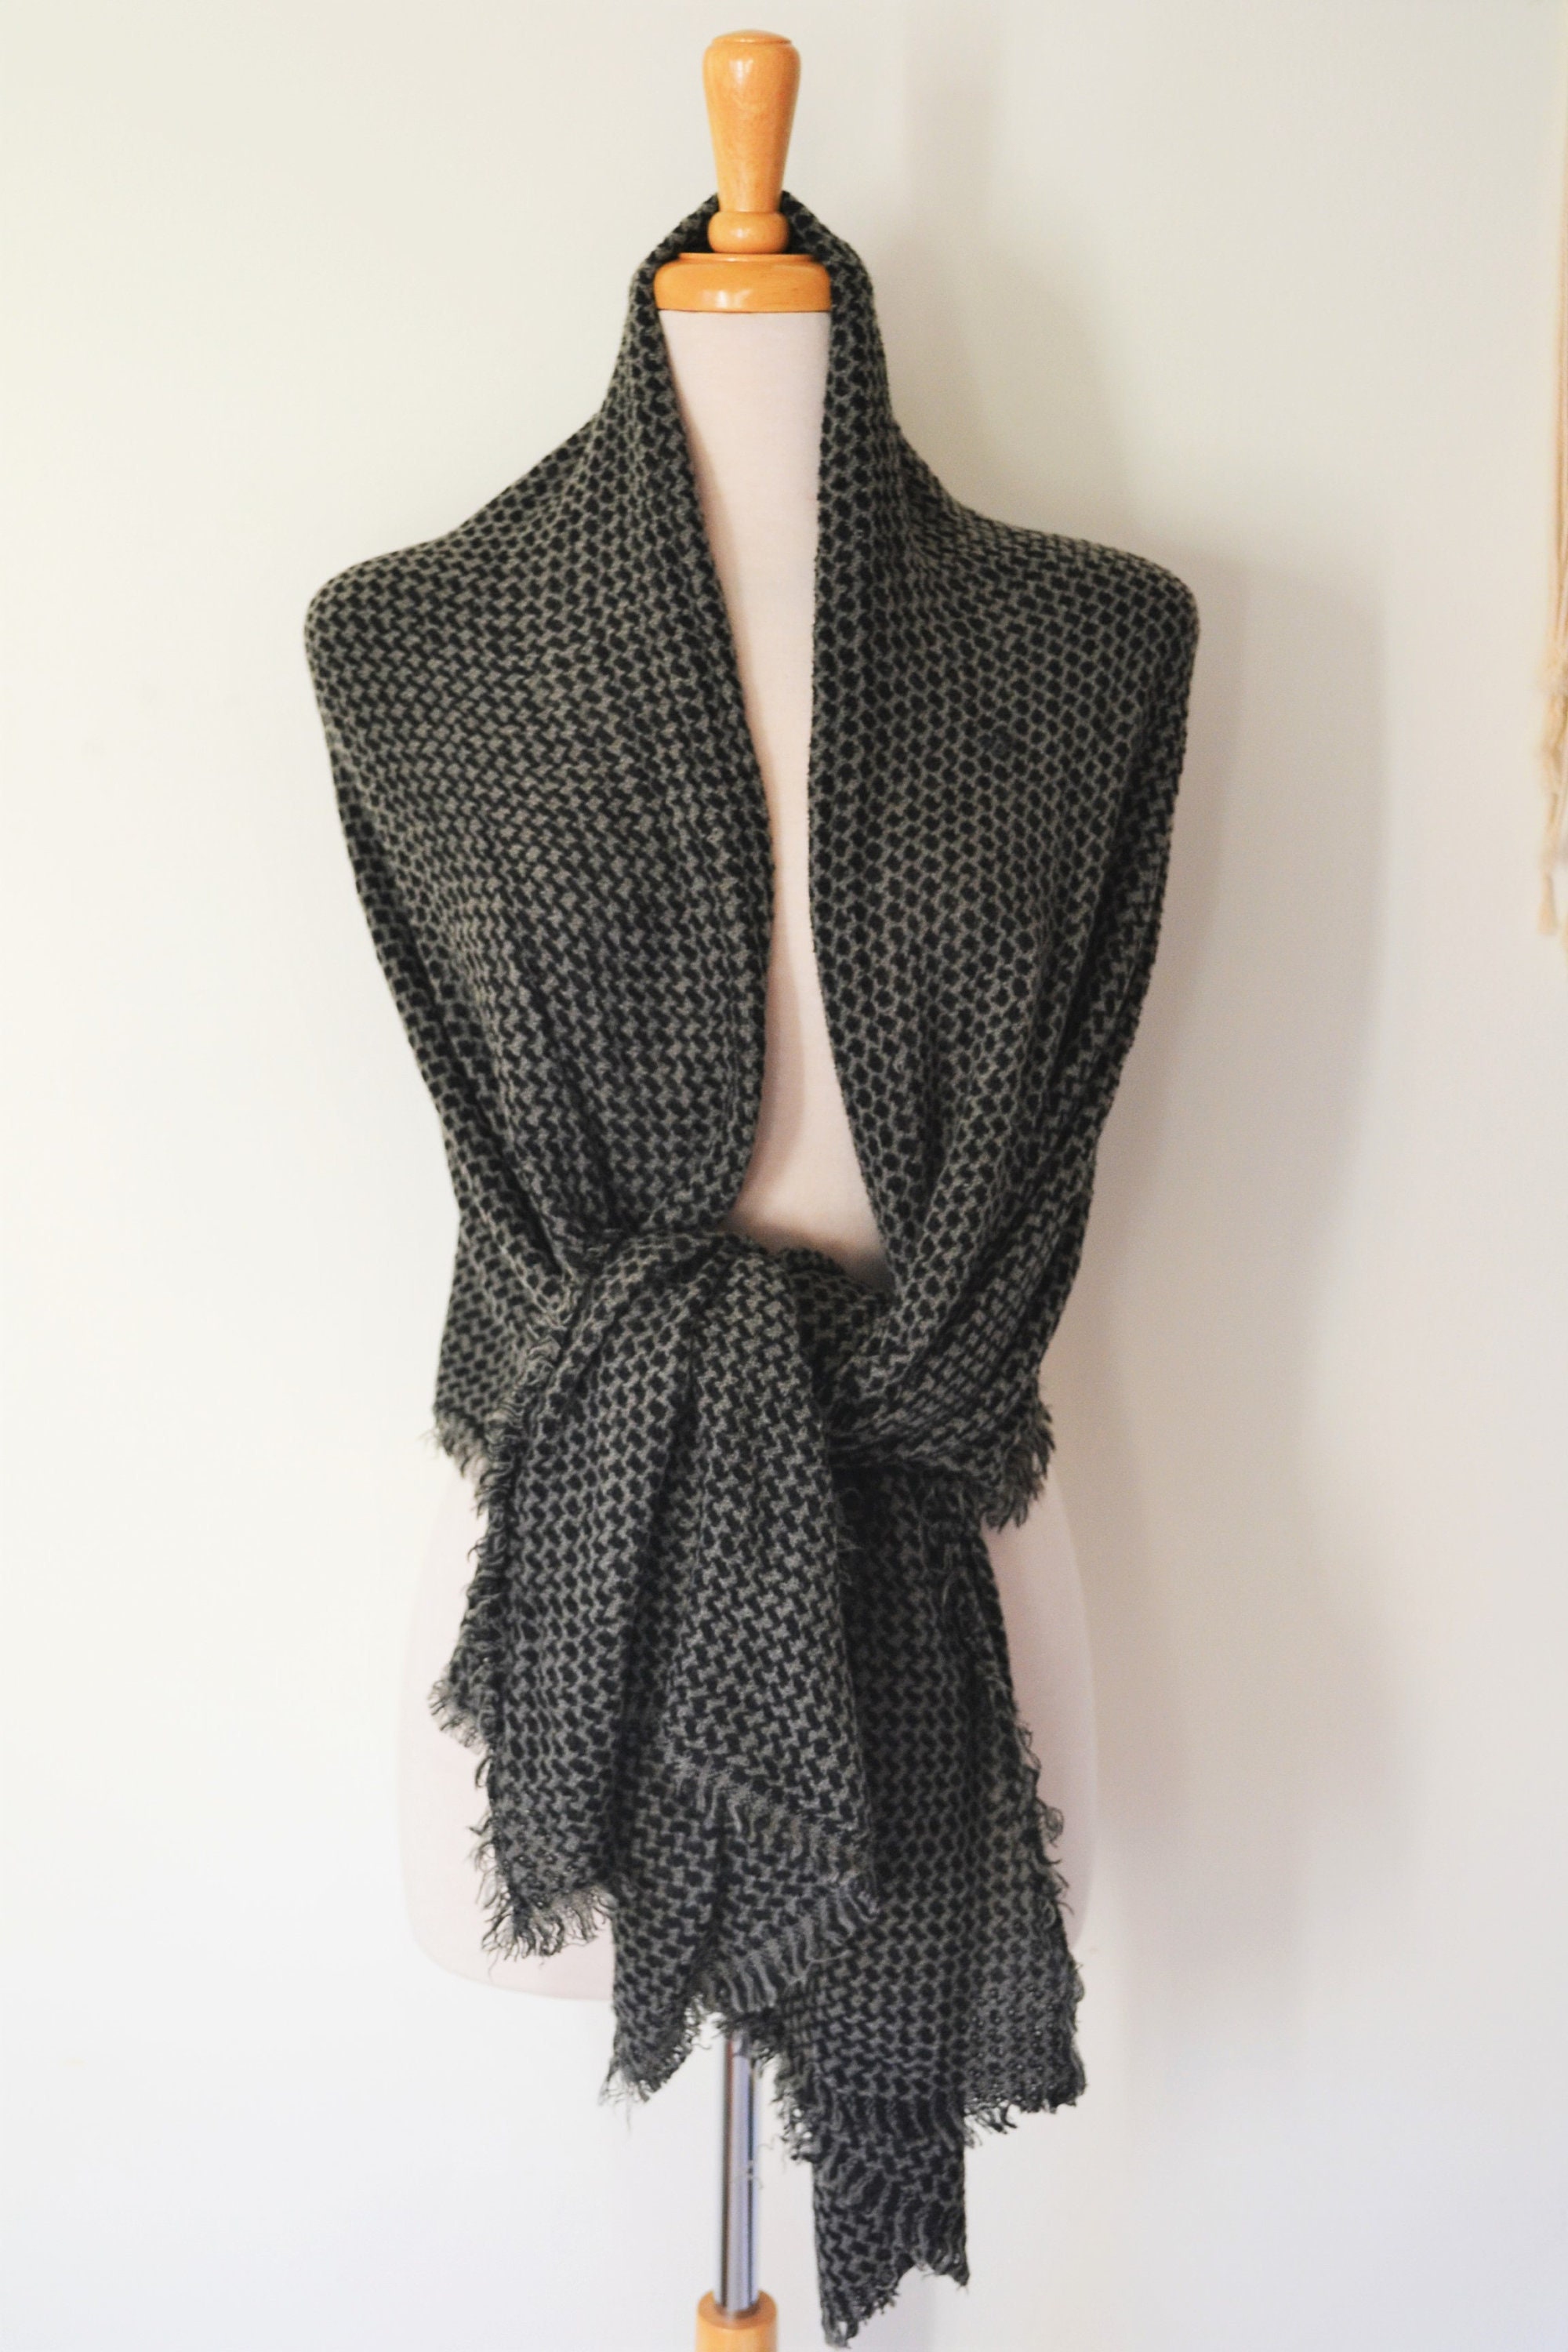 Buttery Soft Cashmere Blend Blanket Wrap, Mini Houndstooth Print, Cozy Warm Throw, Womens Fashion Shawls, Knits